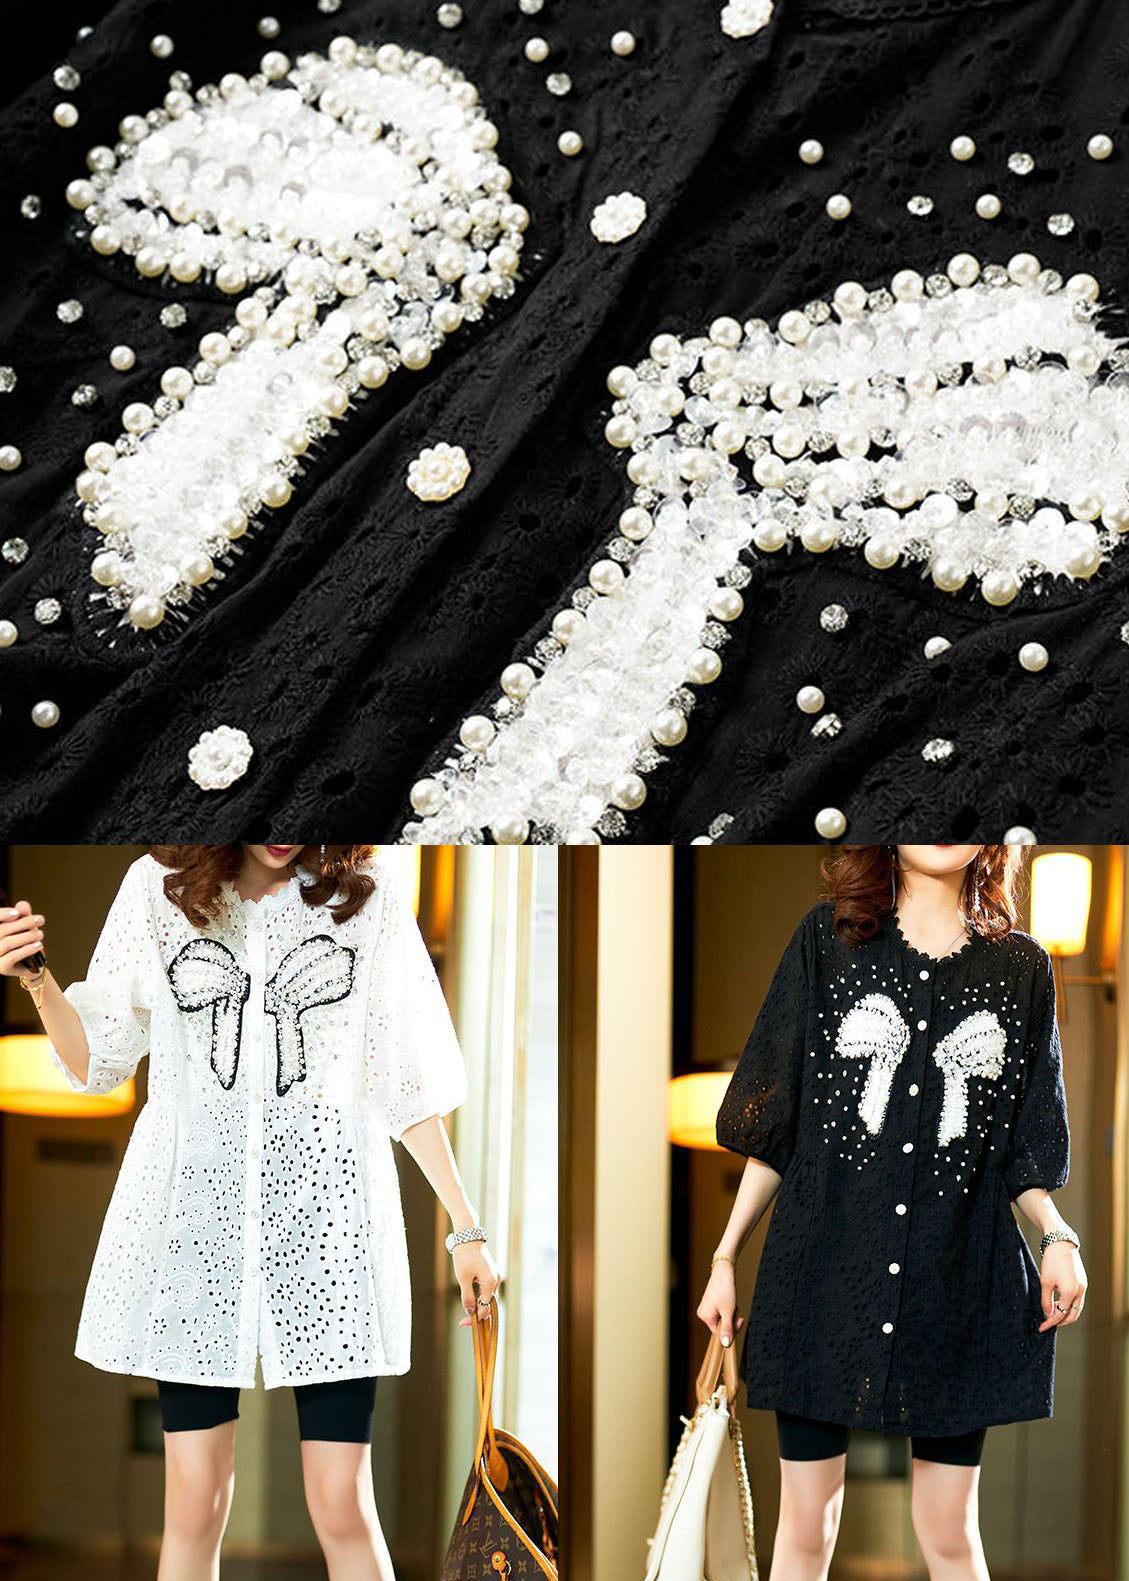 Italian Black Hollow Out Nail Bead Patchwork Cotton Shirt Top Summer LY3858 - fabuloryshop